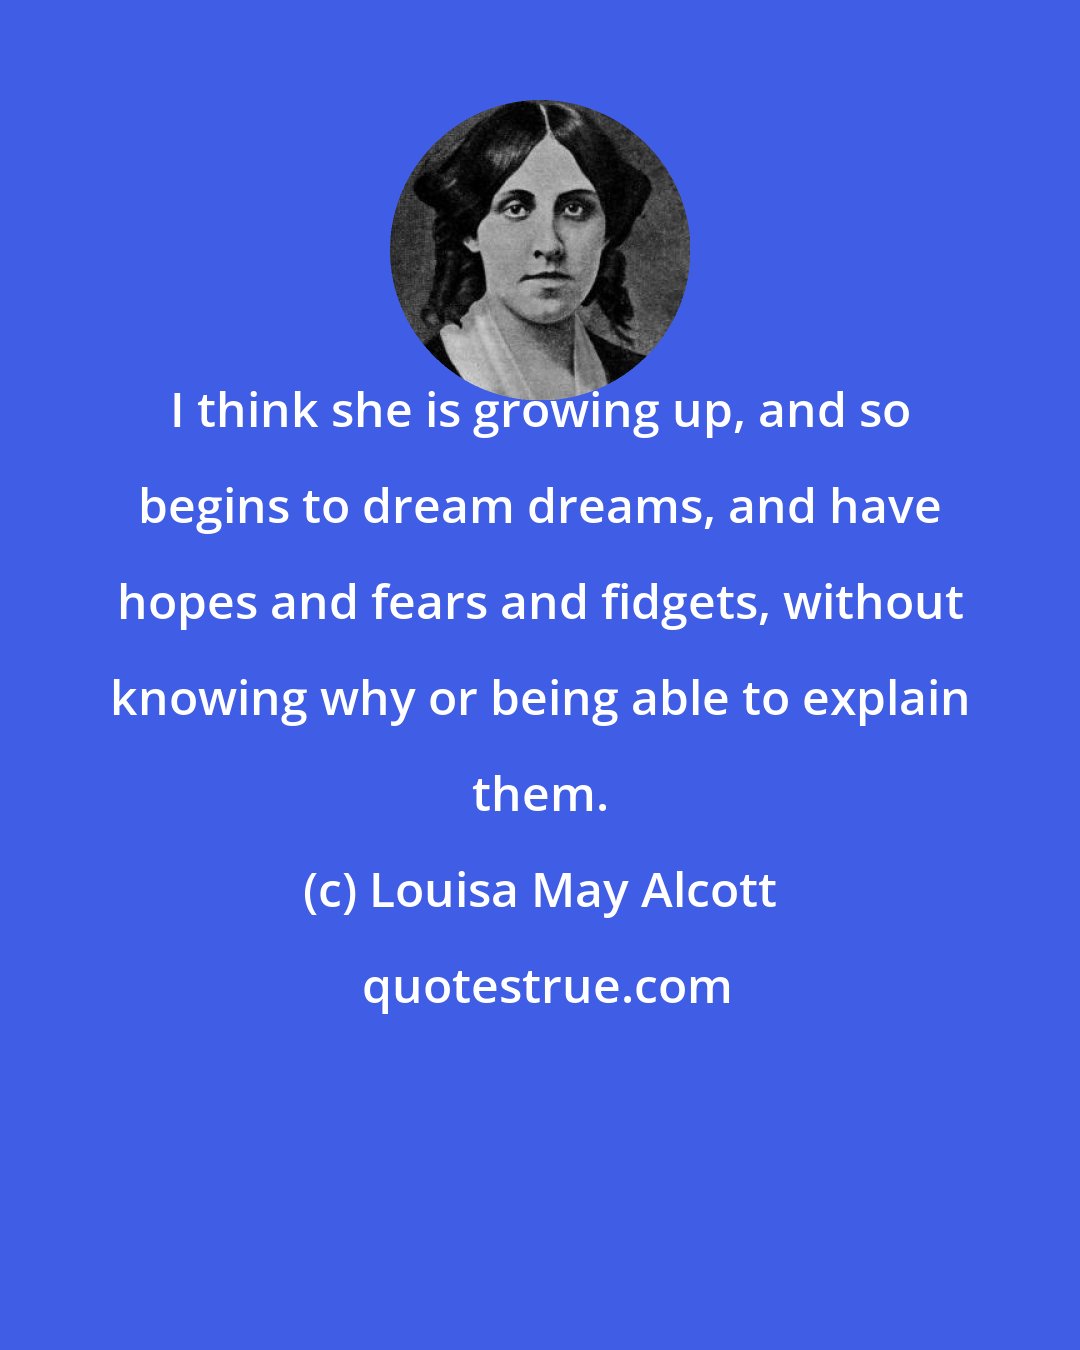 Louisa May Alcott: I think she is growing up, and so begins to dream dreams, and have hopes and fears and fidgets, without knowing why or being able to explain them.